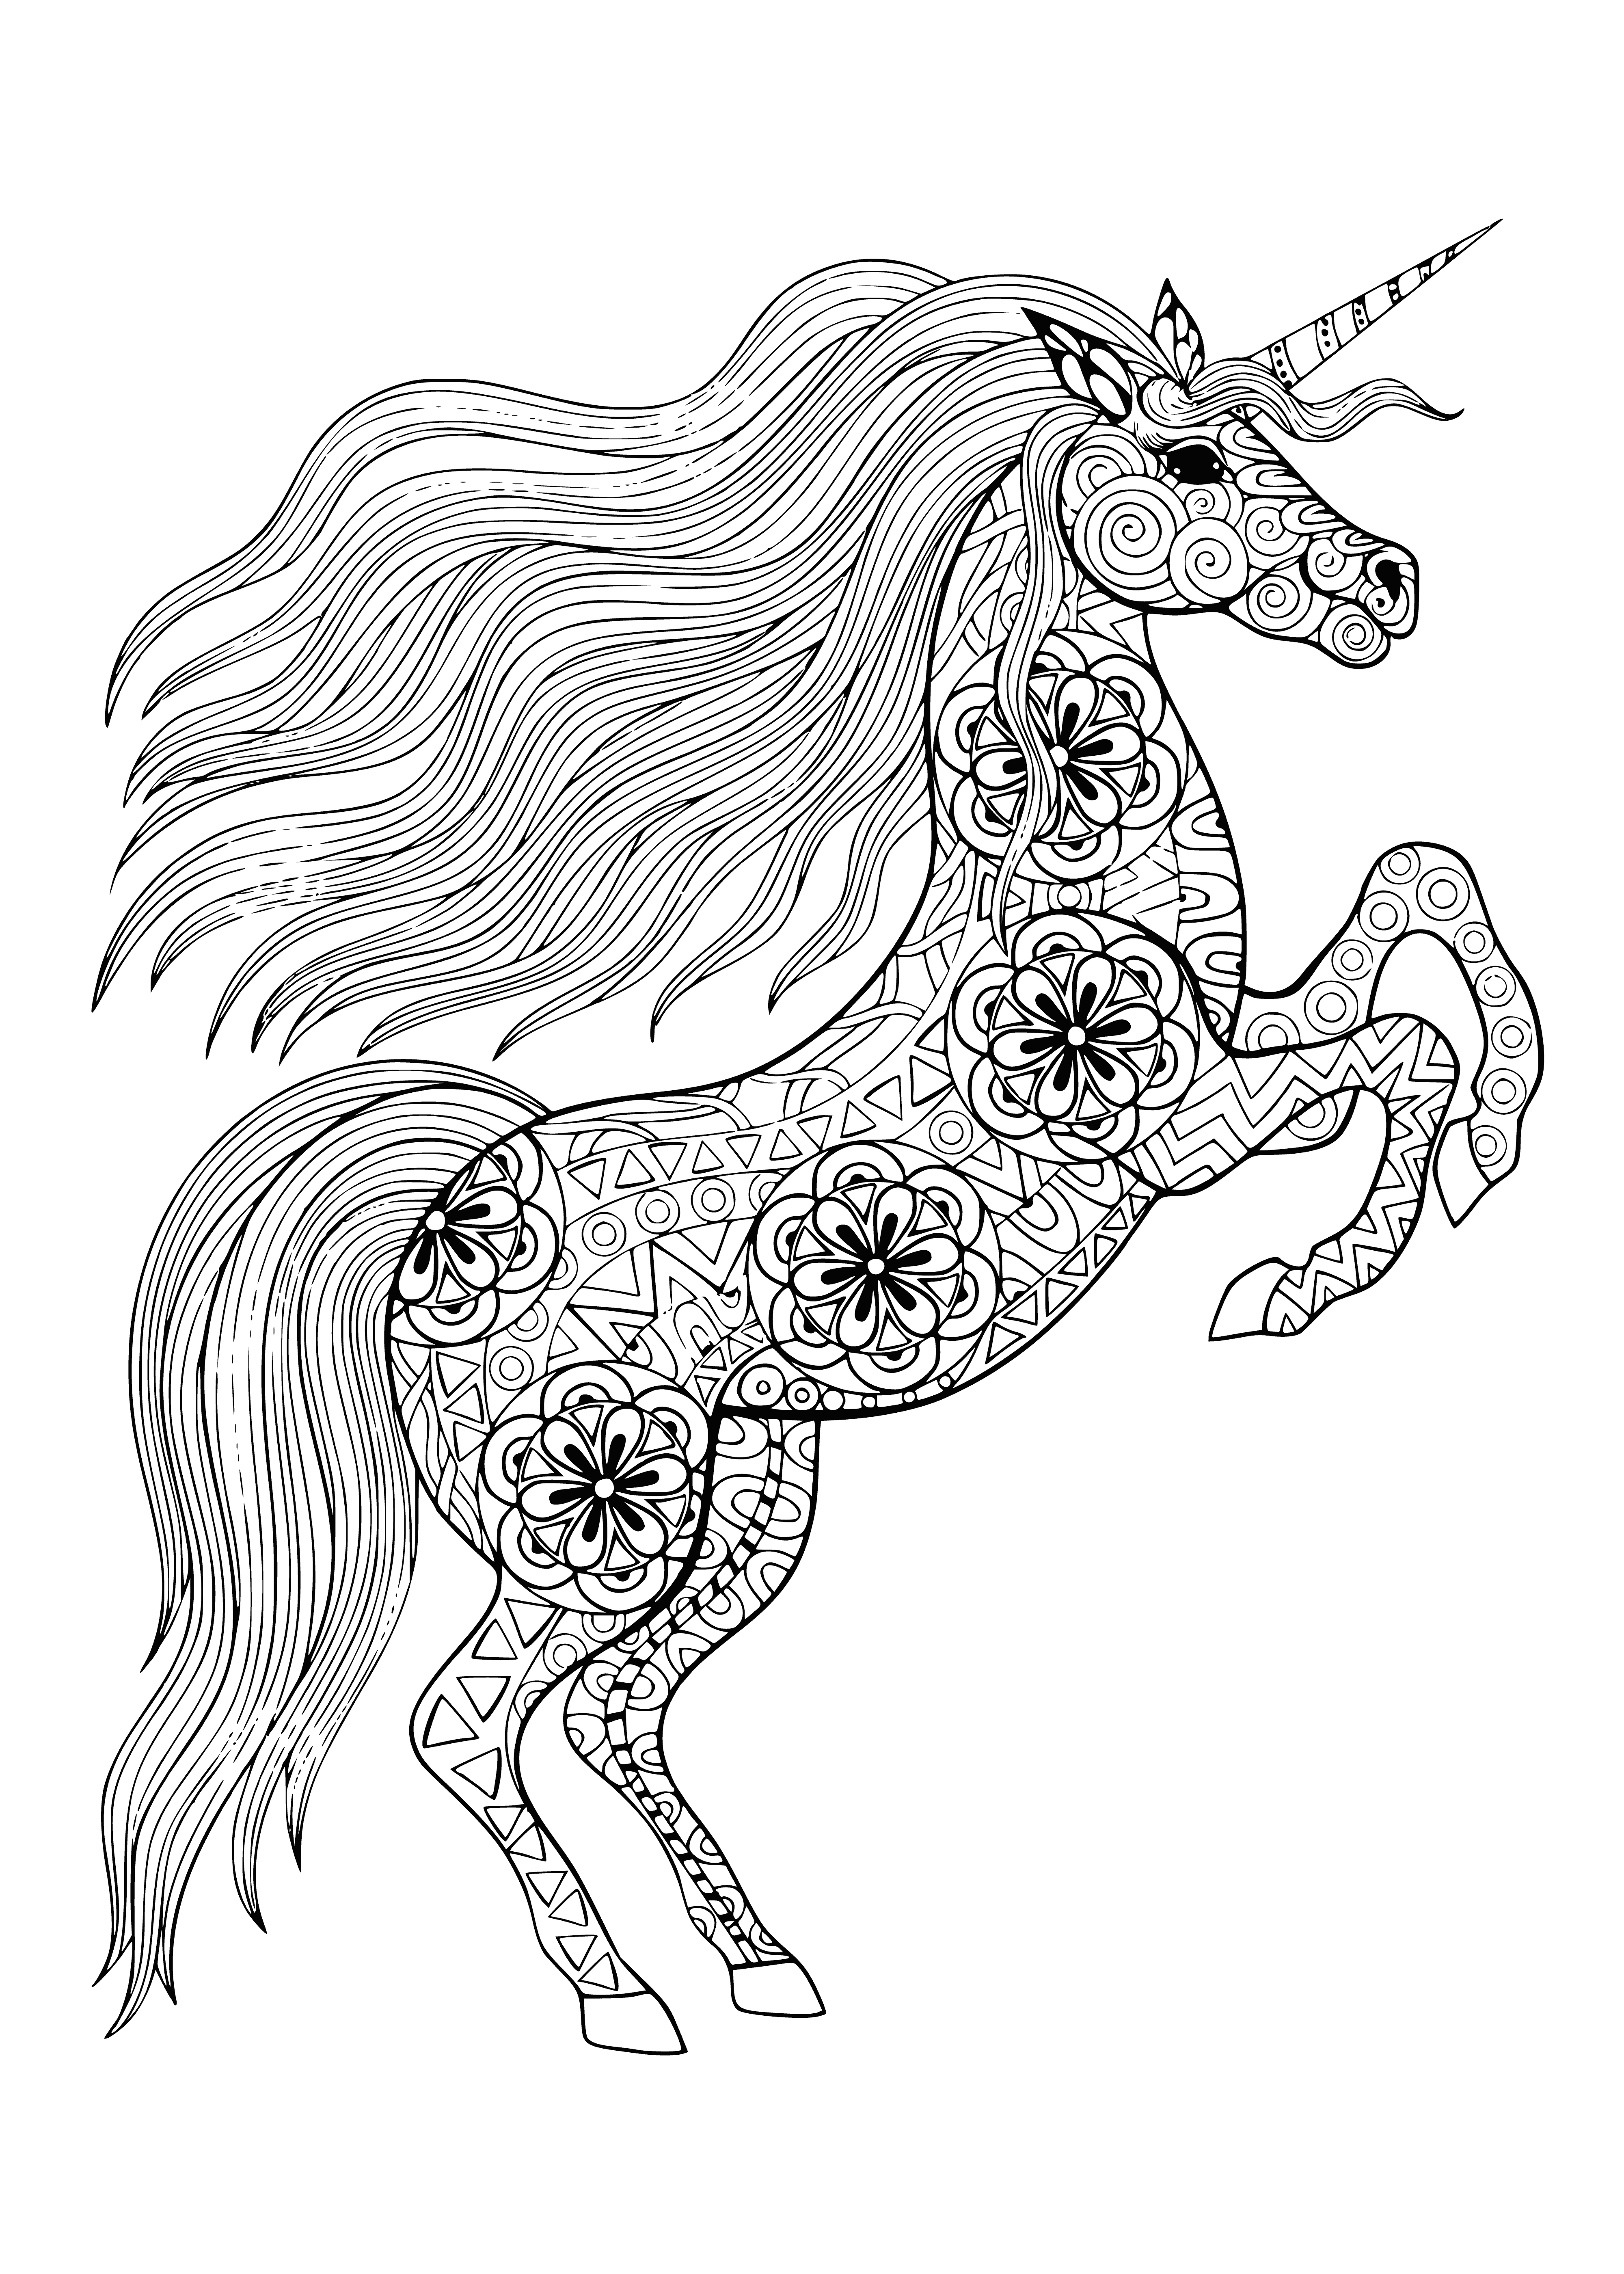 coloring page: Unicorns are happily playing in a sparkly forest - some with wings, some with curling horns in a variety of colors and patterns.